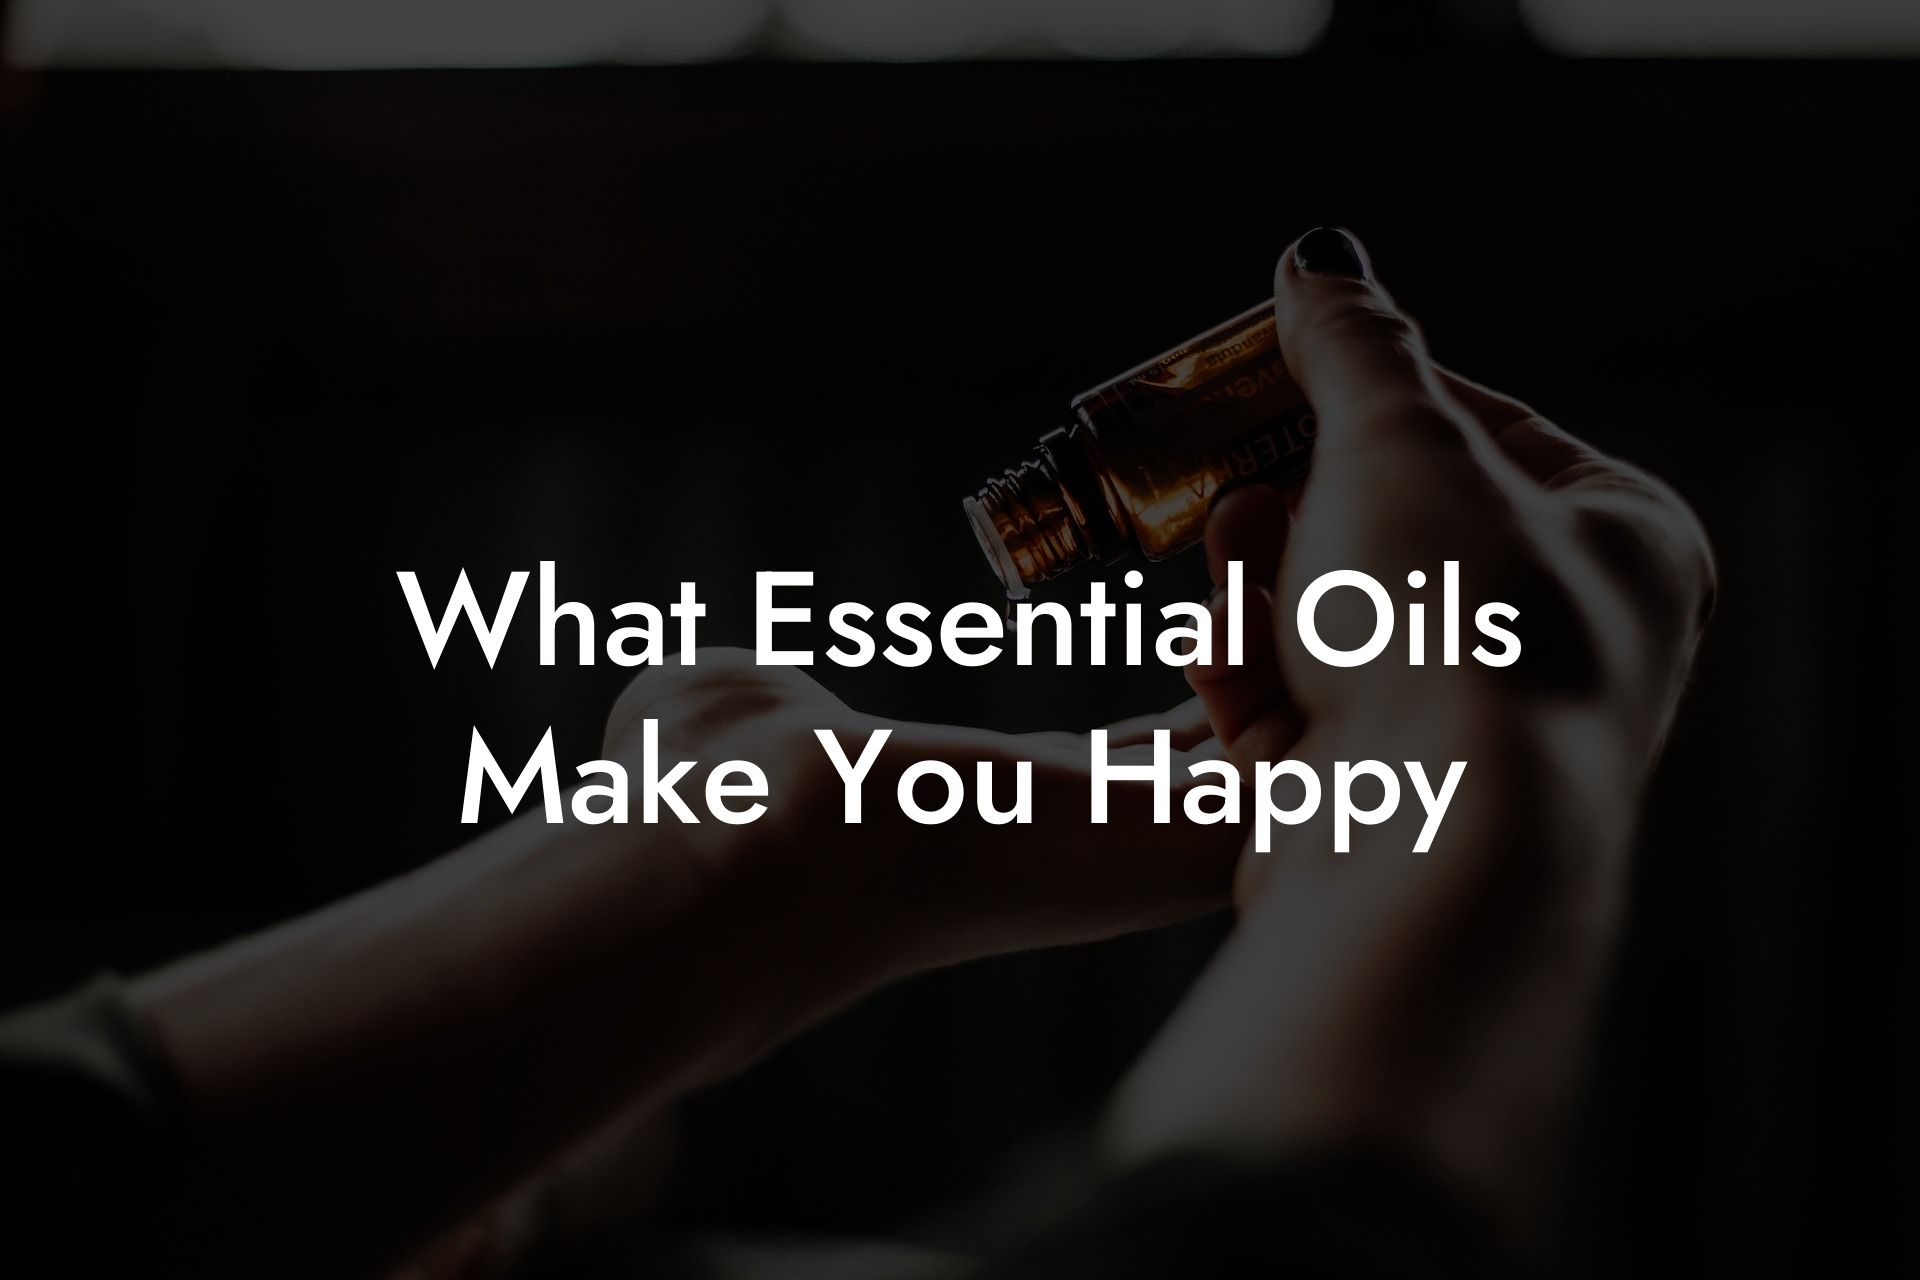 What Essential Oils Make You Happy